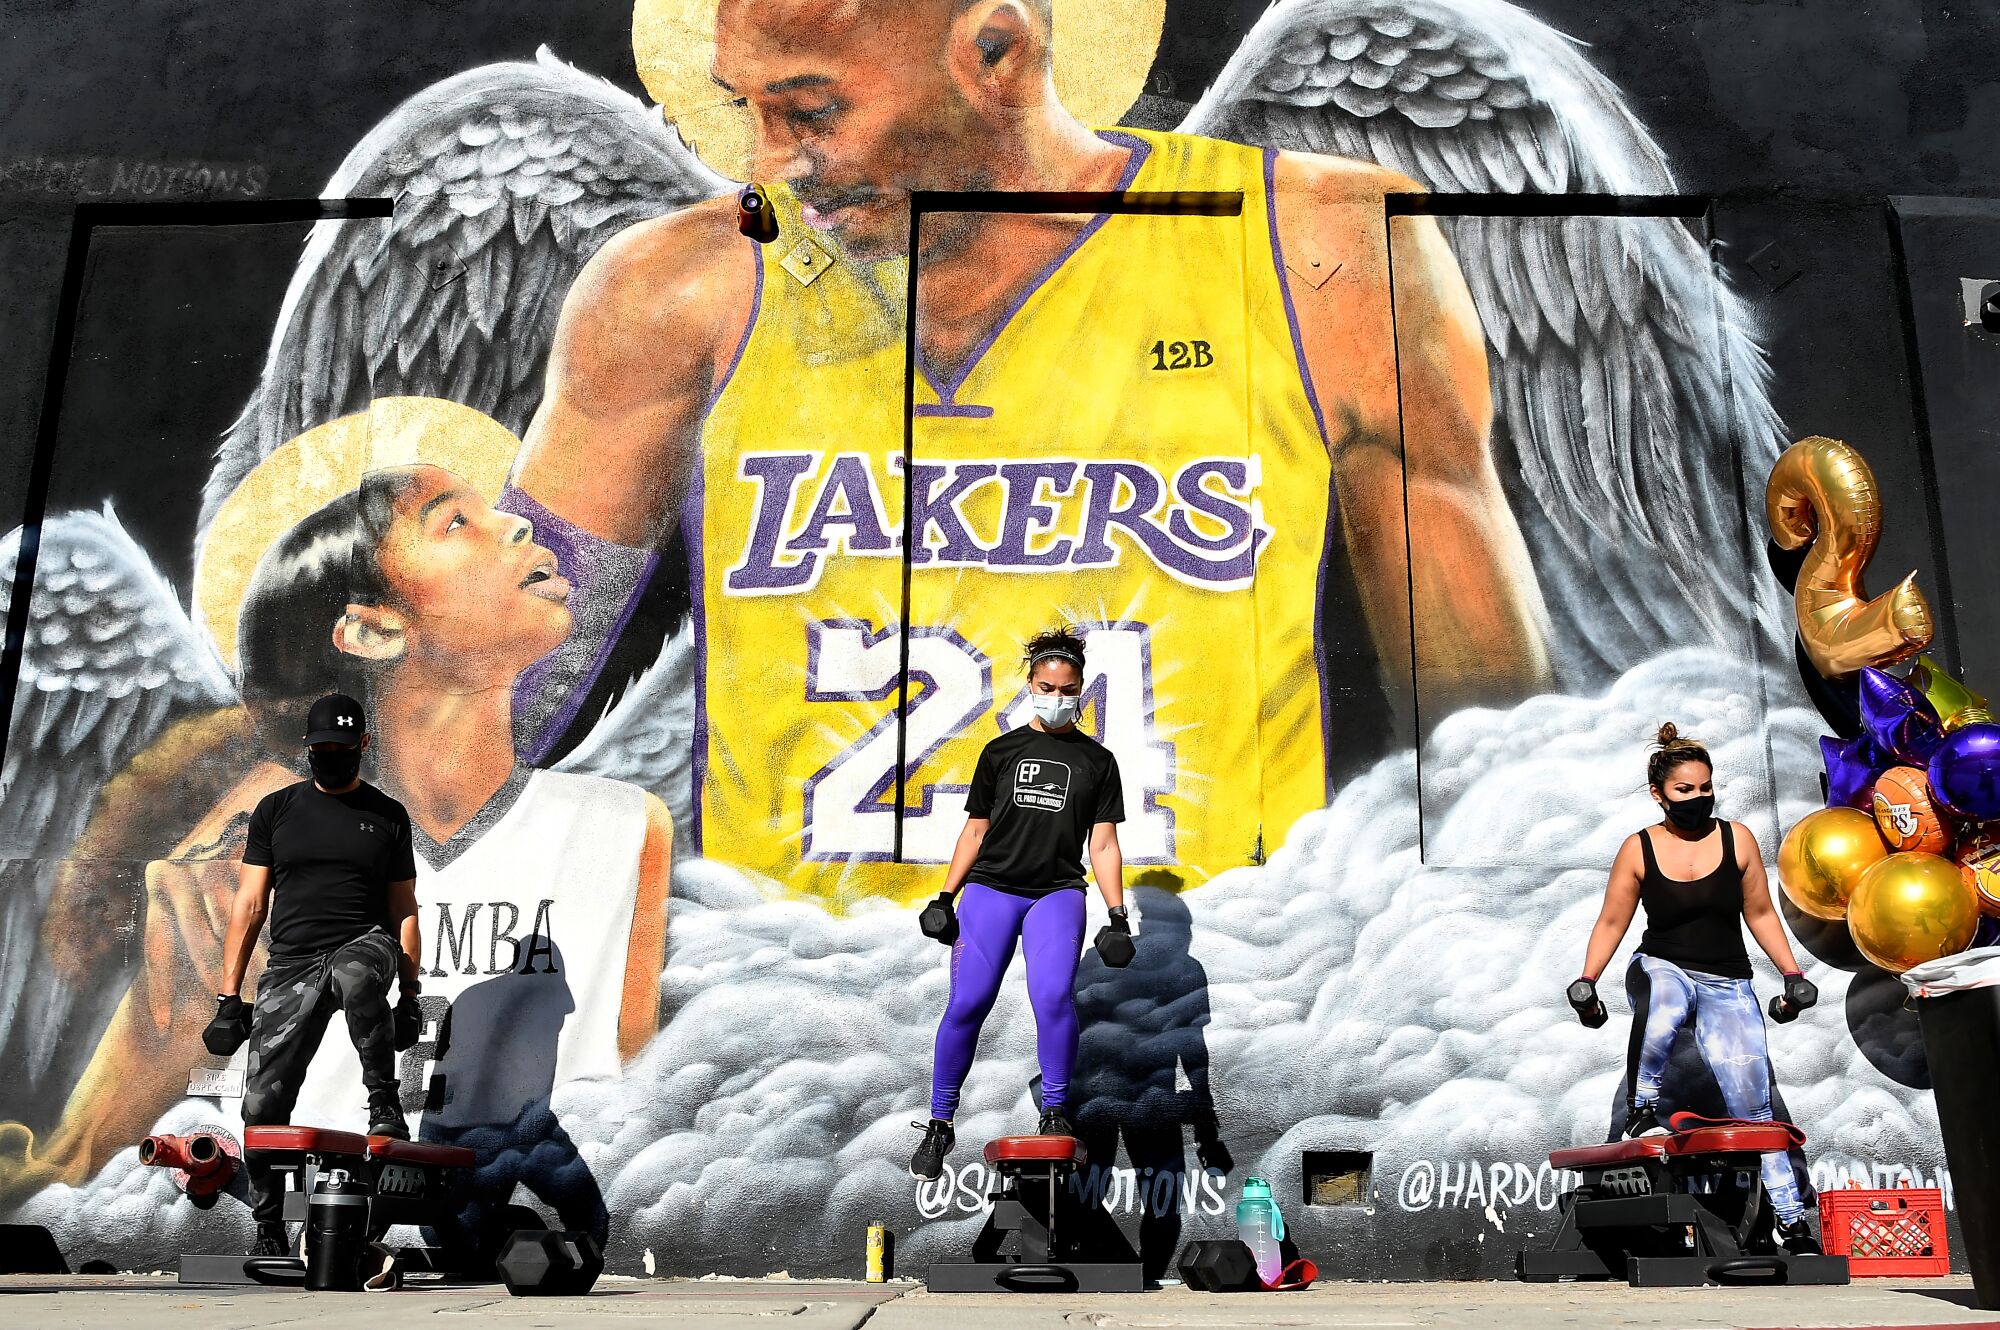 People work out in front of a mural of Lakers legend Kobe Bryant and his daughter Gianna.